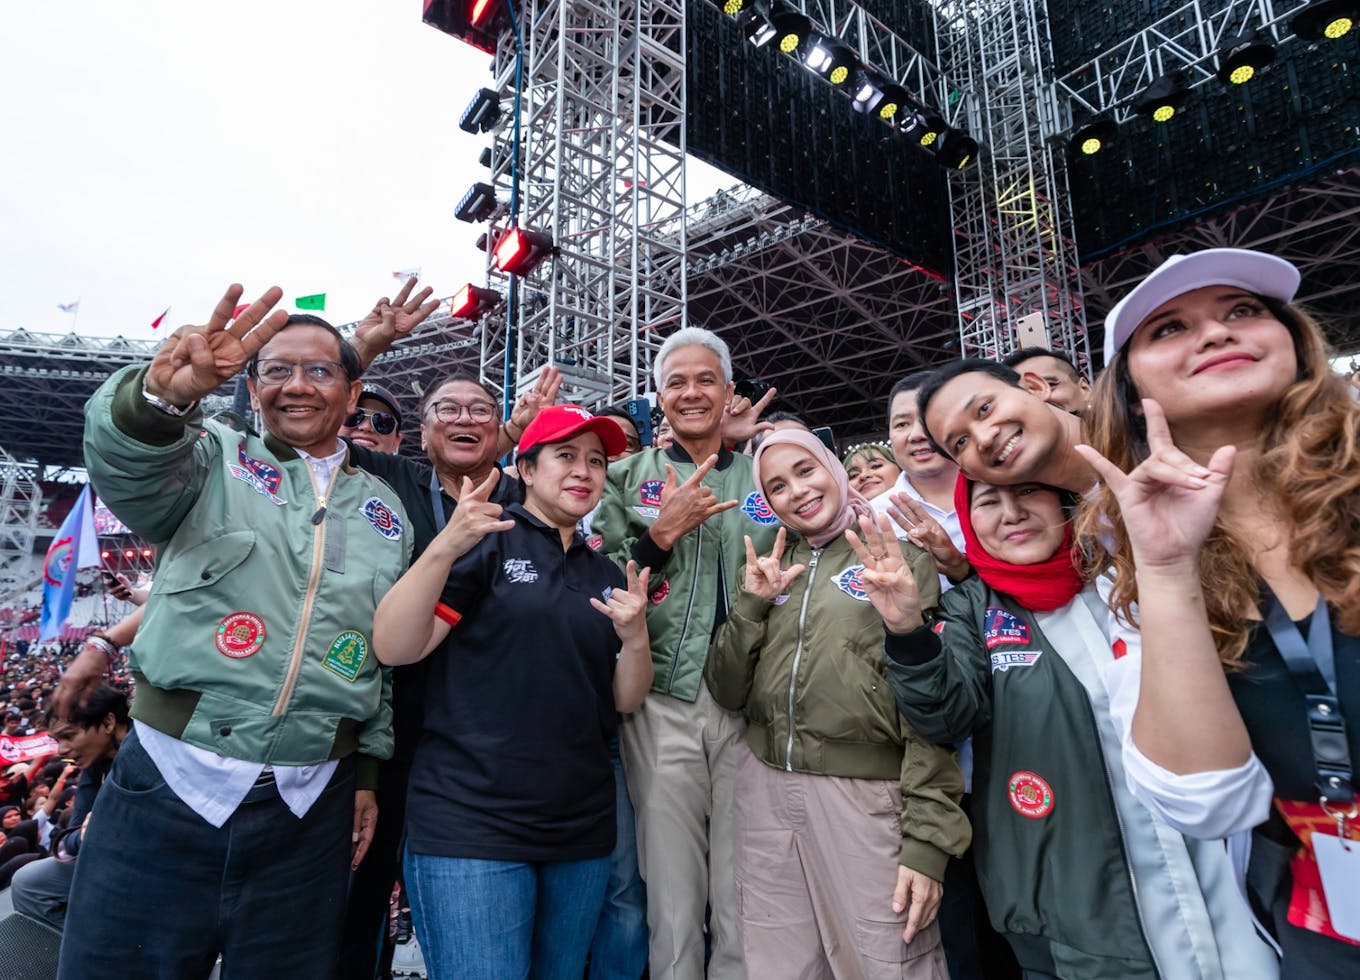 Mahfud (far left) and Pranowo (centre) on the campaign trail in Jakarta. Image: Ganjar/Pranowo on X